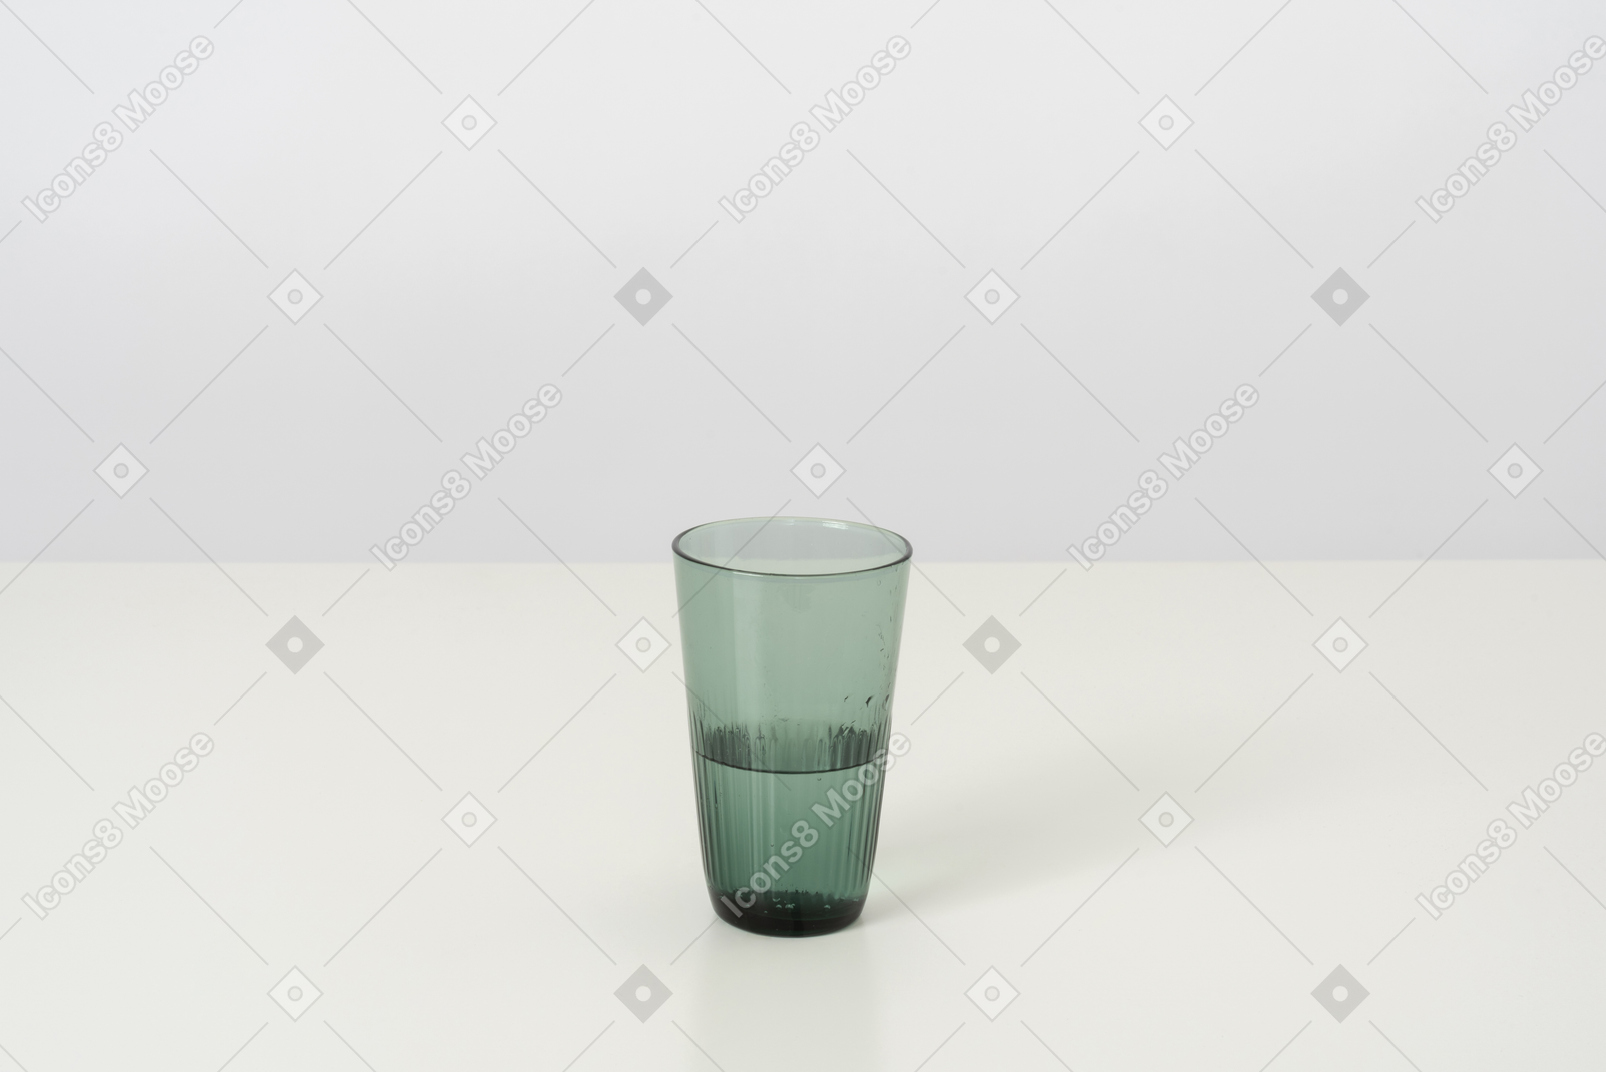 A glass of cold water, designed in a simple style and form